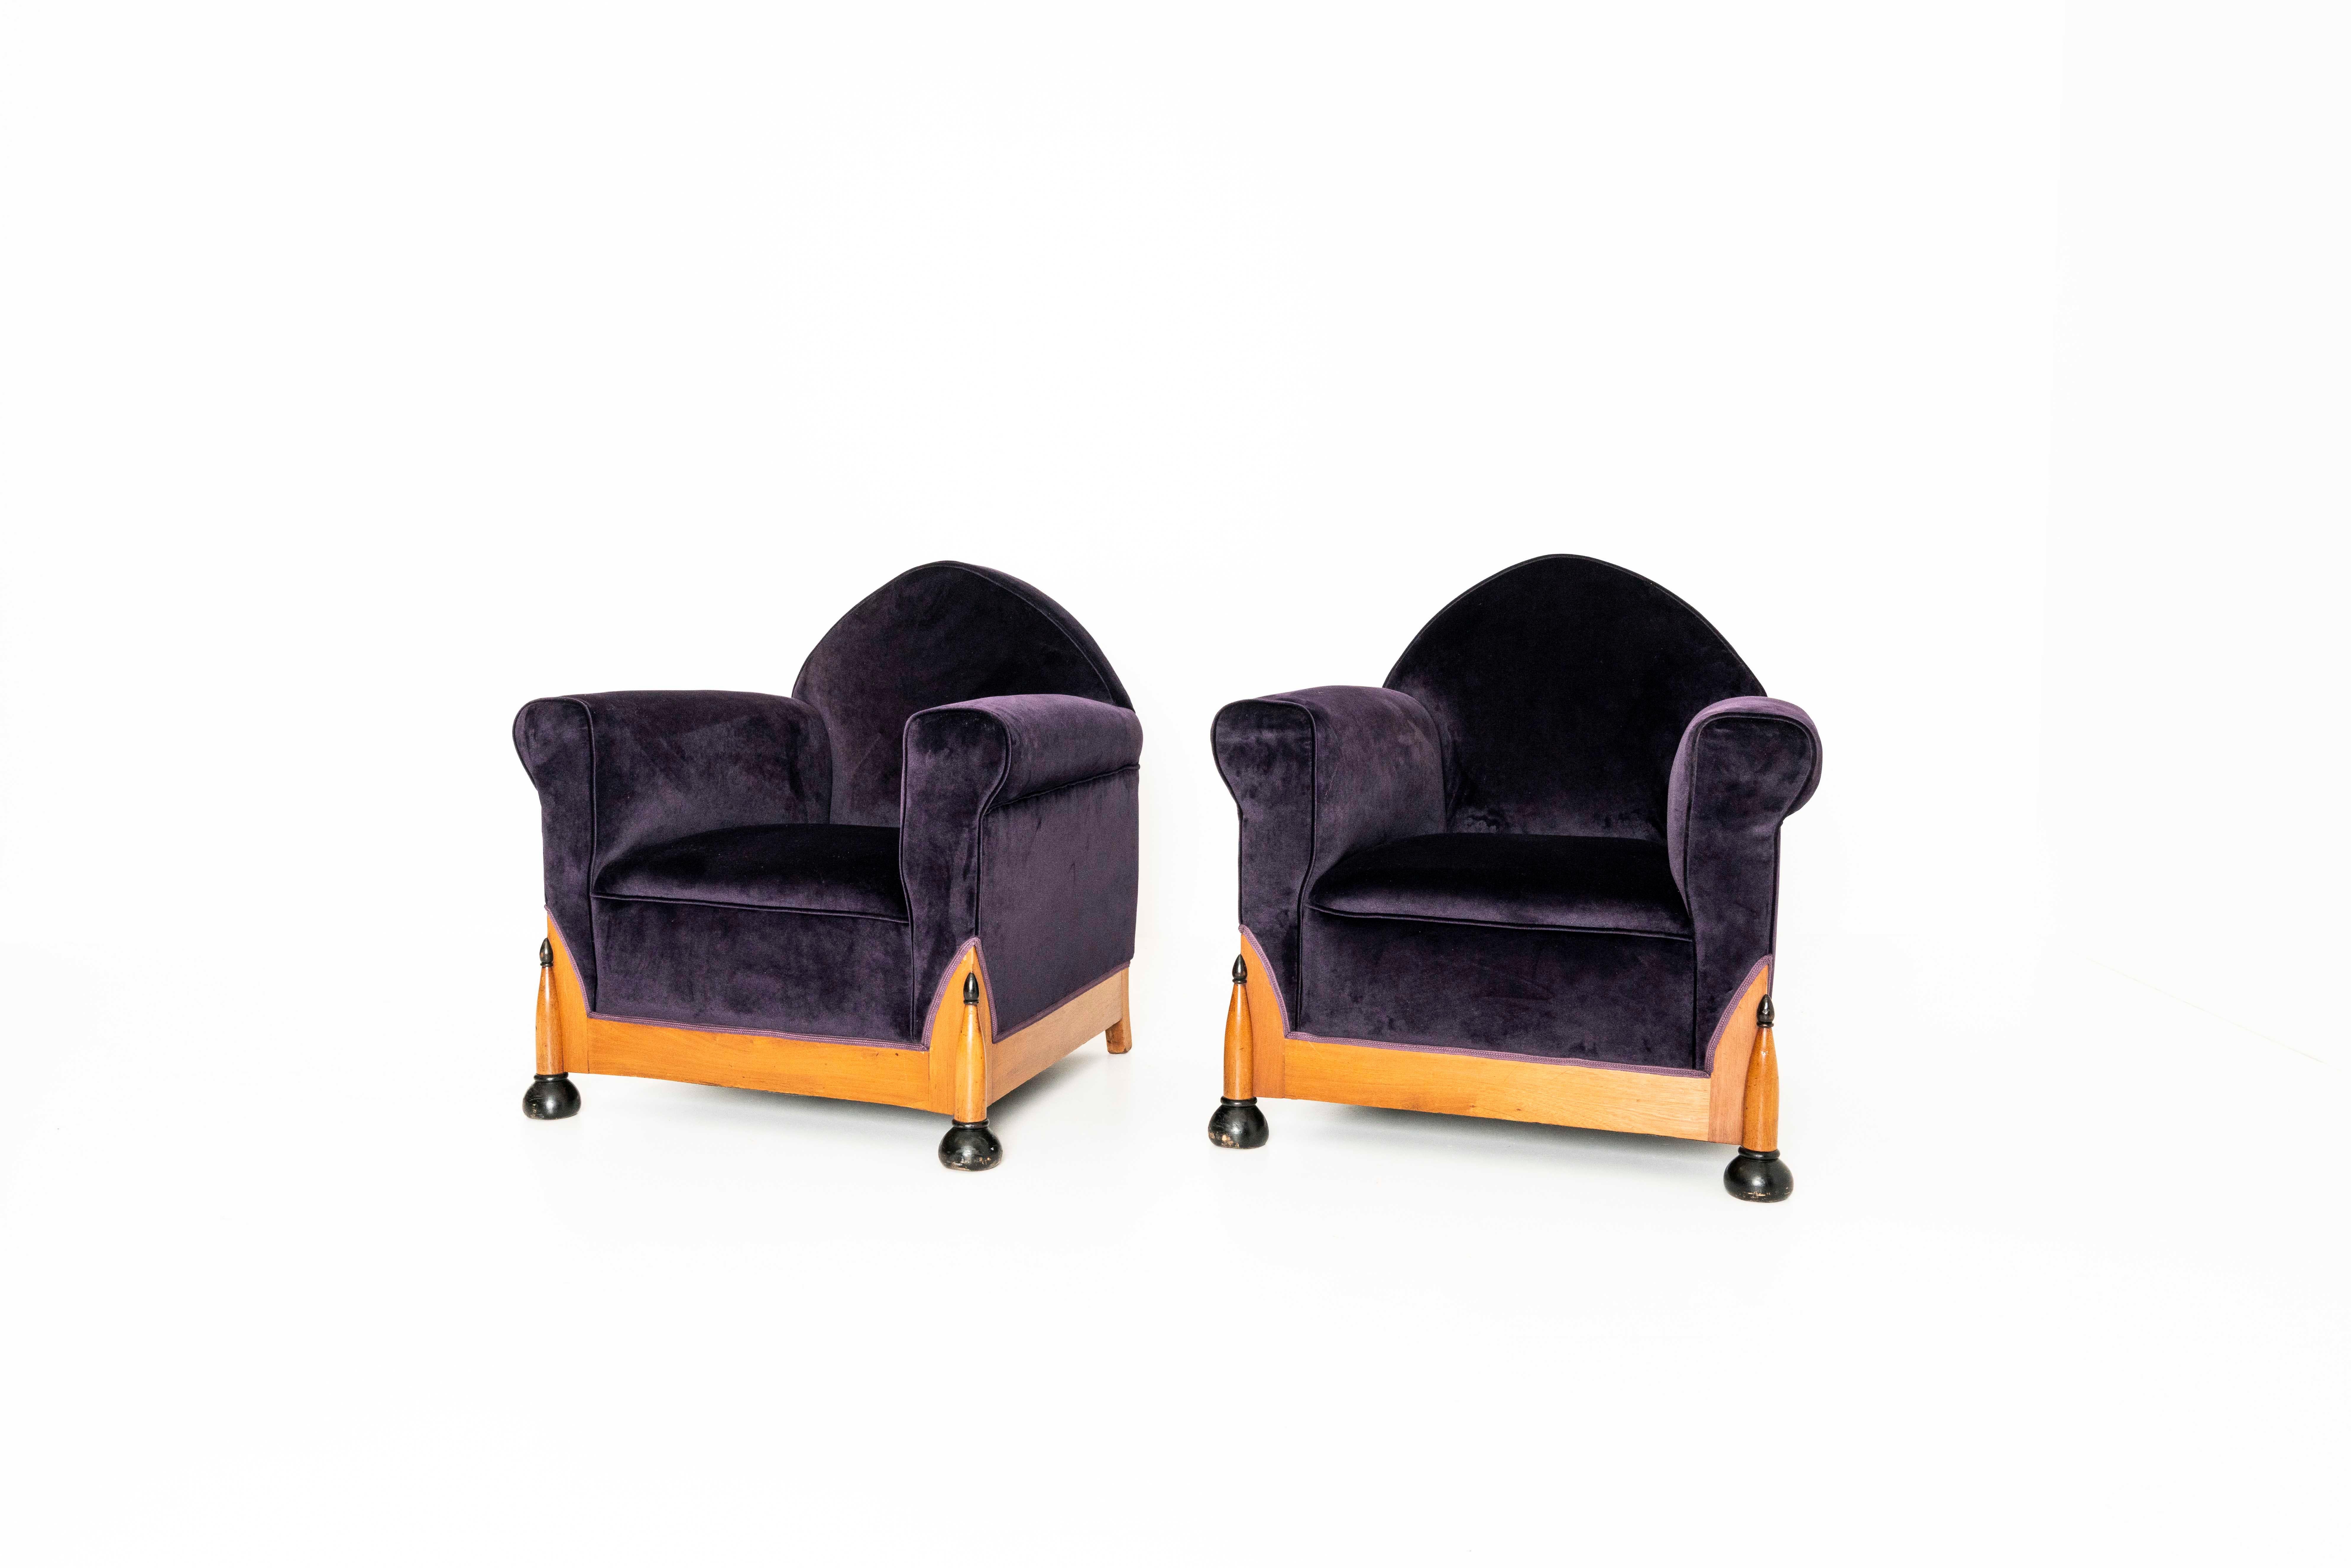 Beautiful set of Amsterdam School or Art Deco Arm Chairs in dark purple velvet, The Netherlands 1930s. These chairs have a robust design with details, like the feet, that are very recognizable for furniture in the 1920s/1930s. They recently have